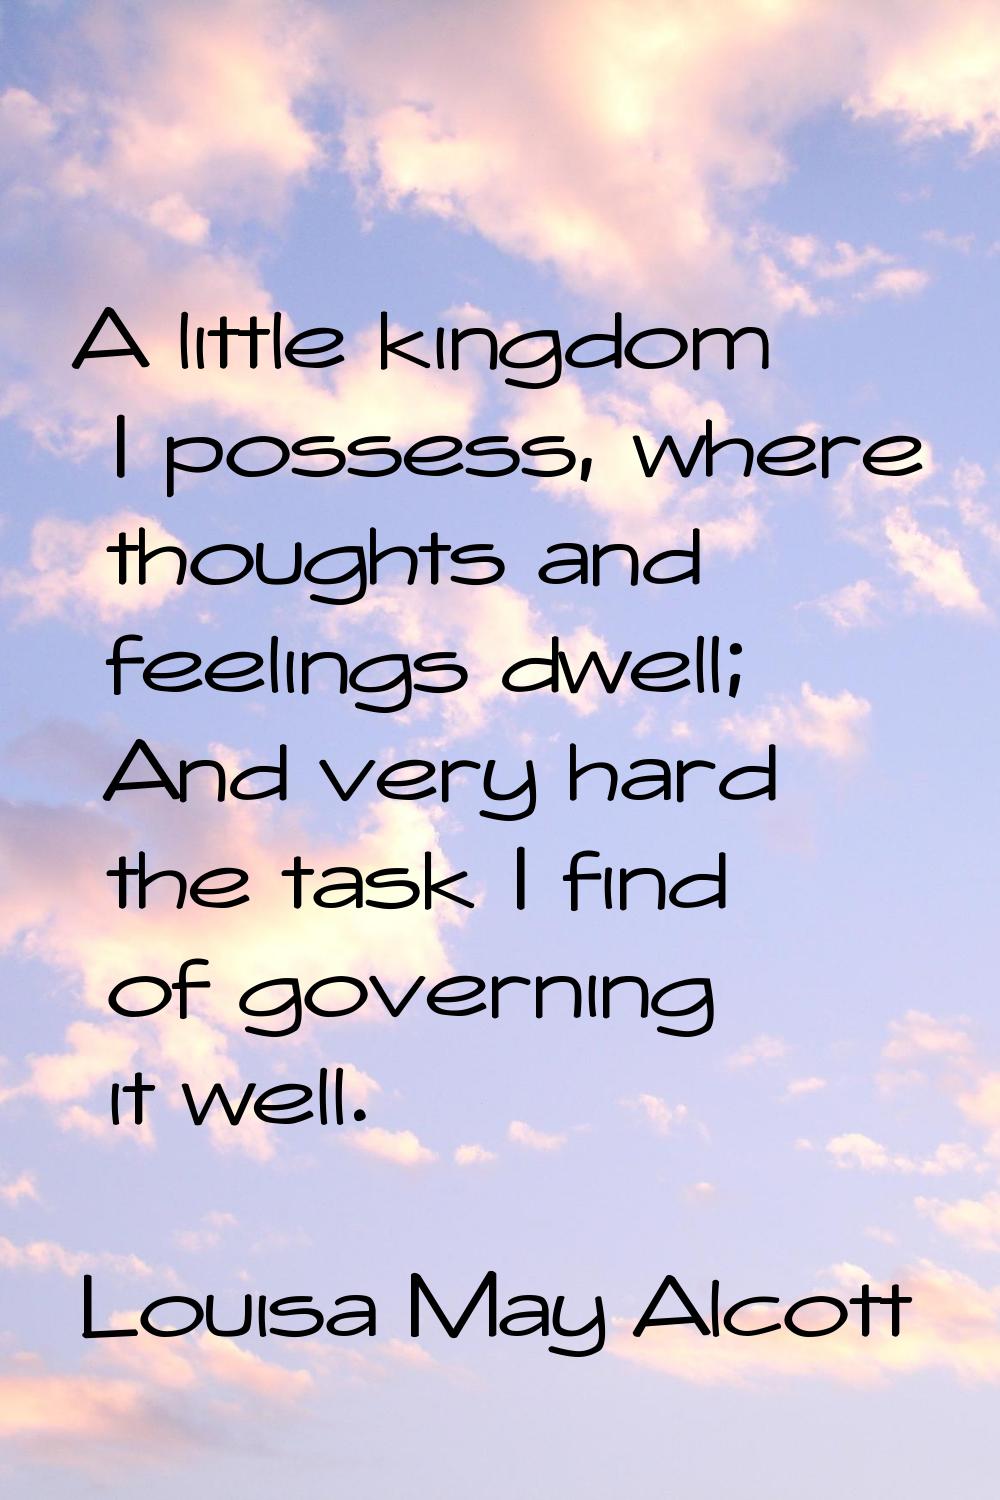 A little kingdom I possess, where thoughts and feelings dwell; And very hard the task I find of gov